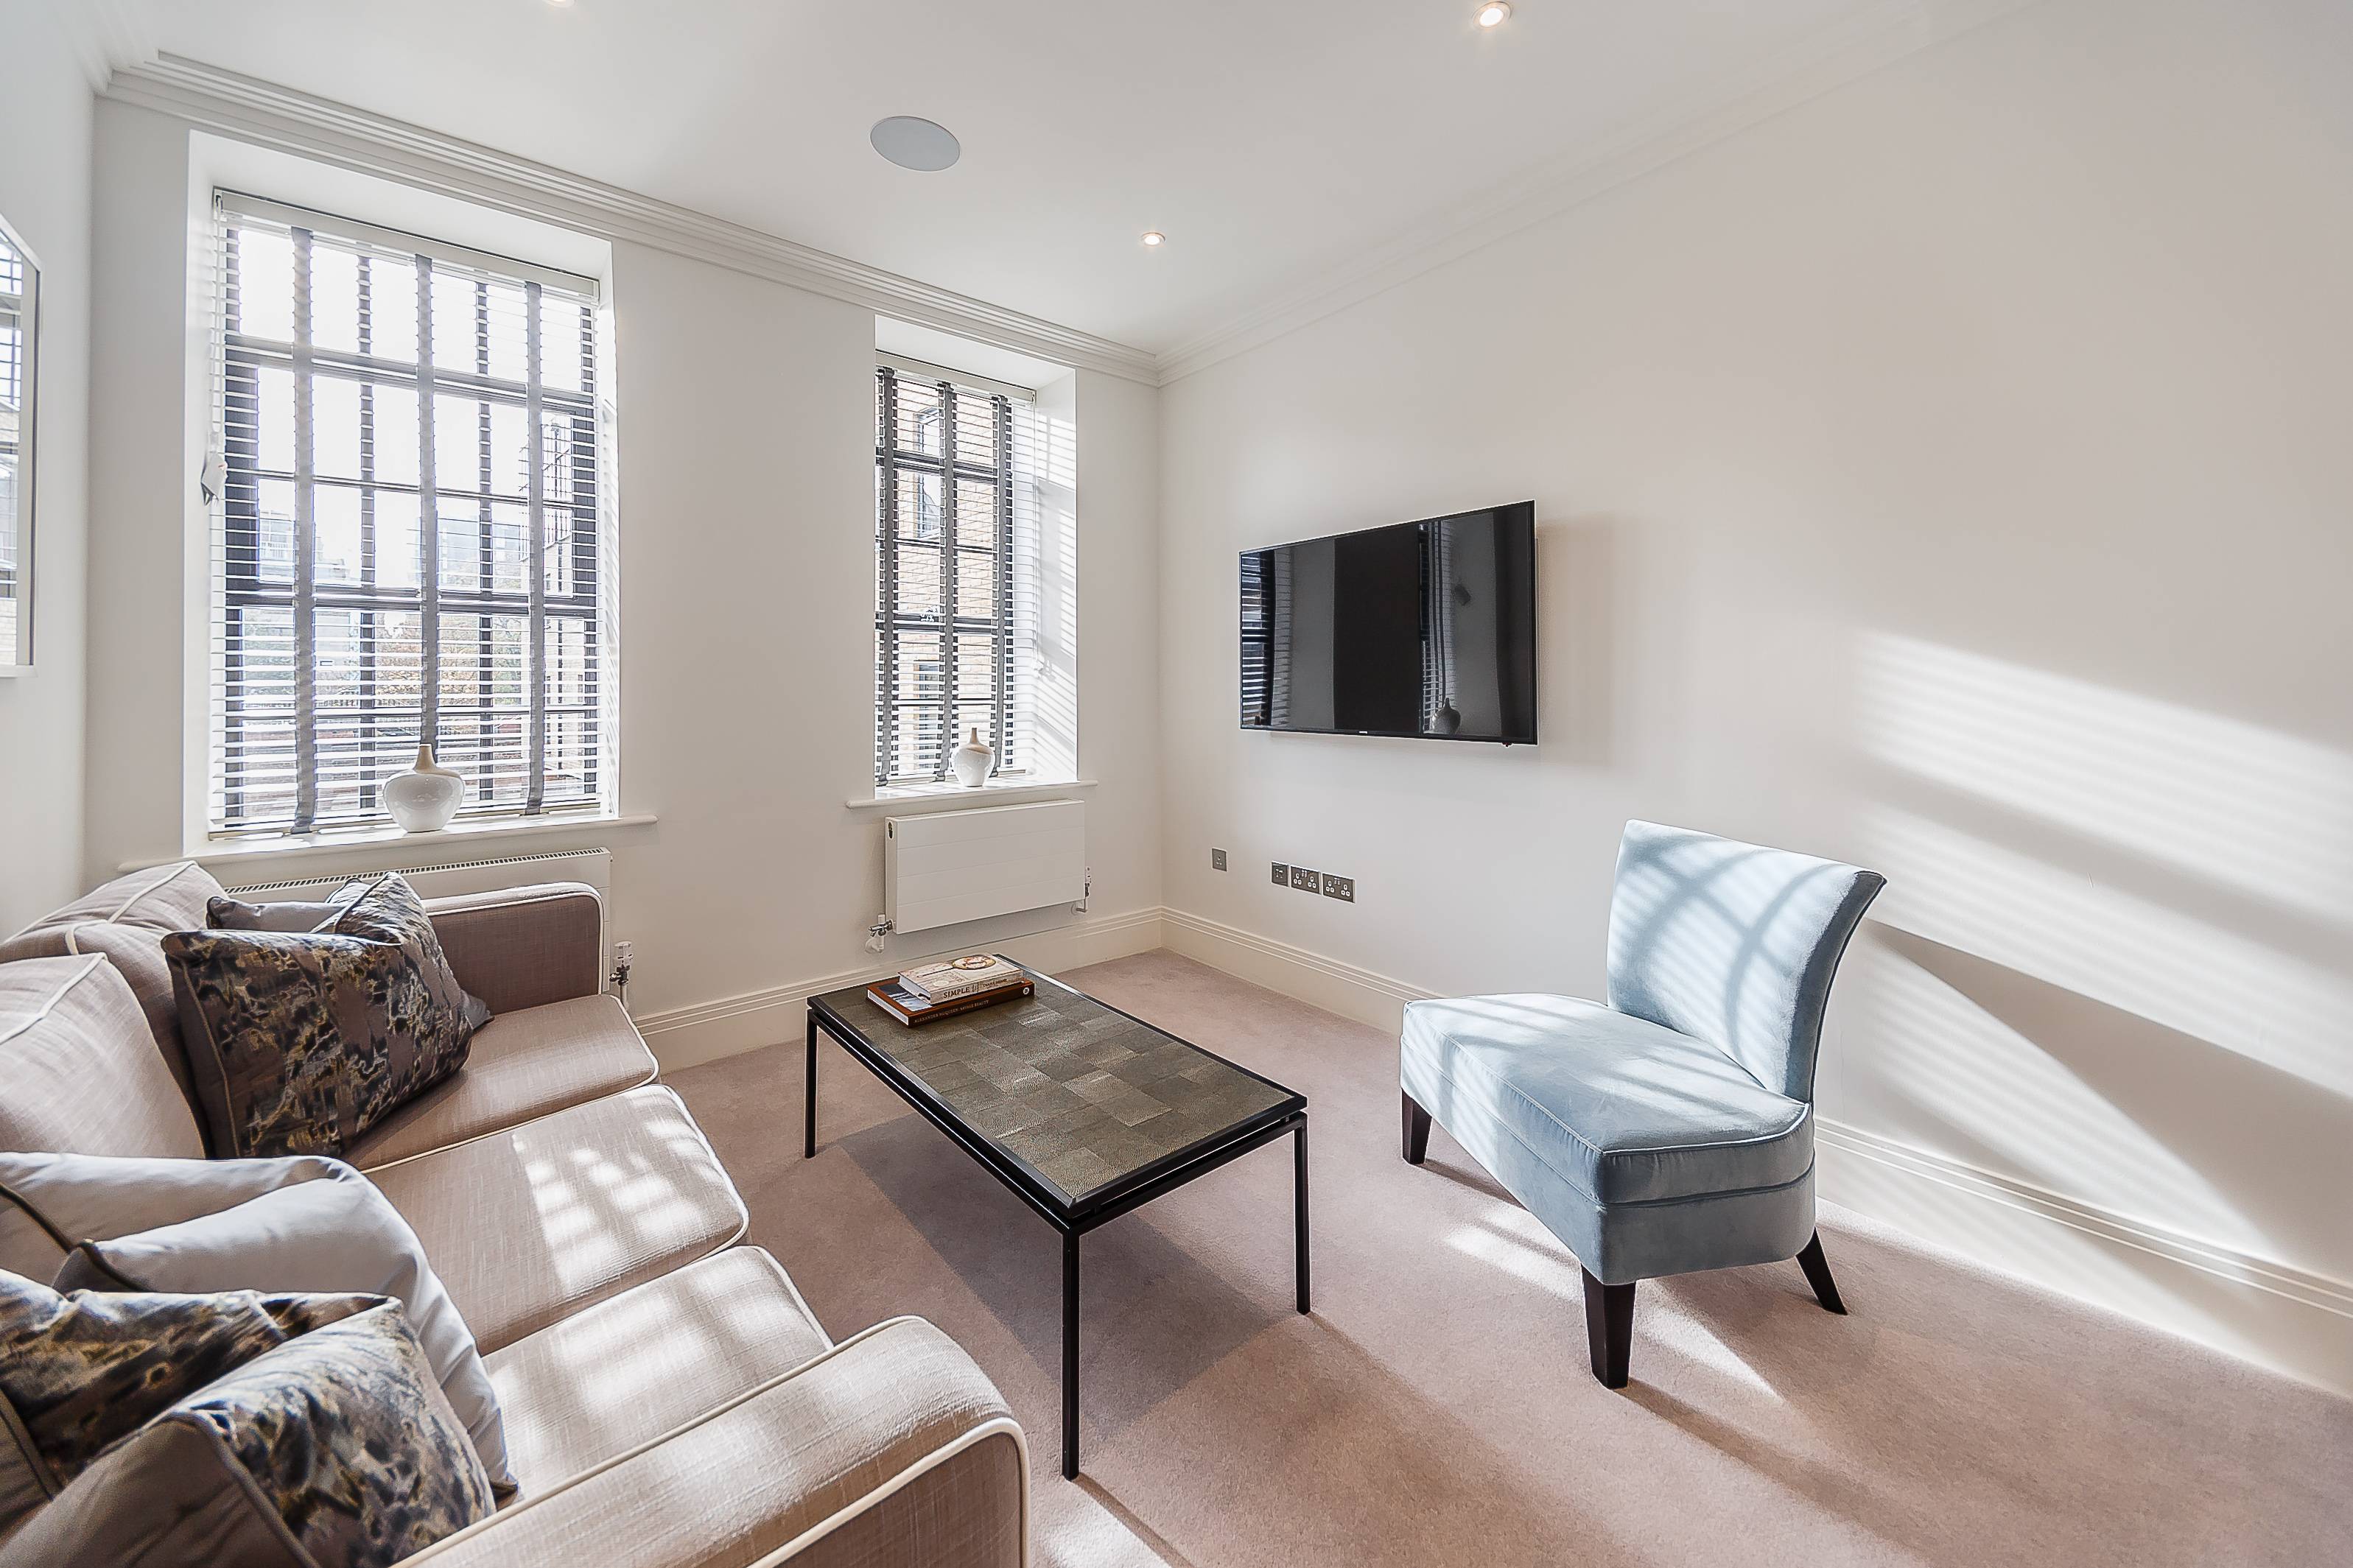 A stunning brand-new interior designed, two-bedroom, two bathroom first-floor apartment facing the courtyard set within this newly converted warehouse, gated development on the River Thames.